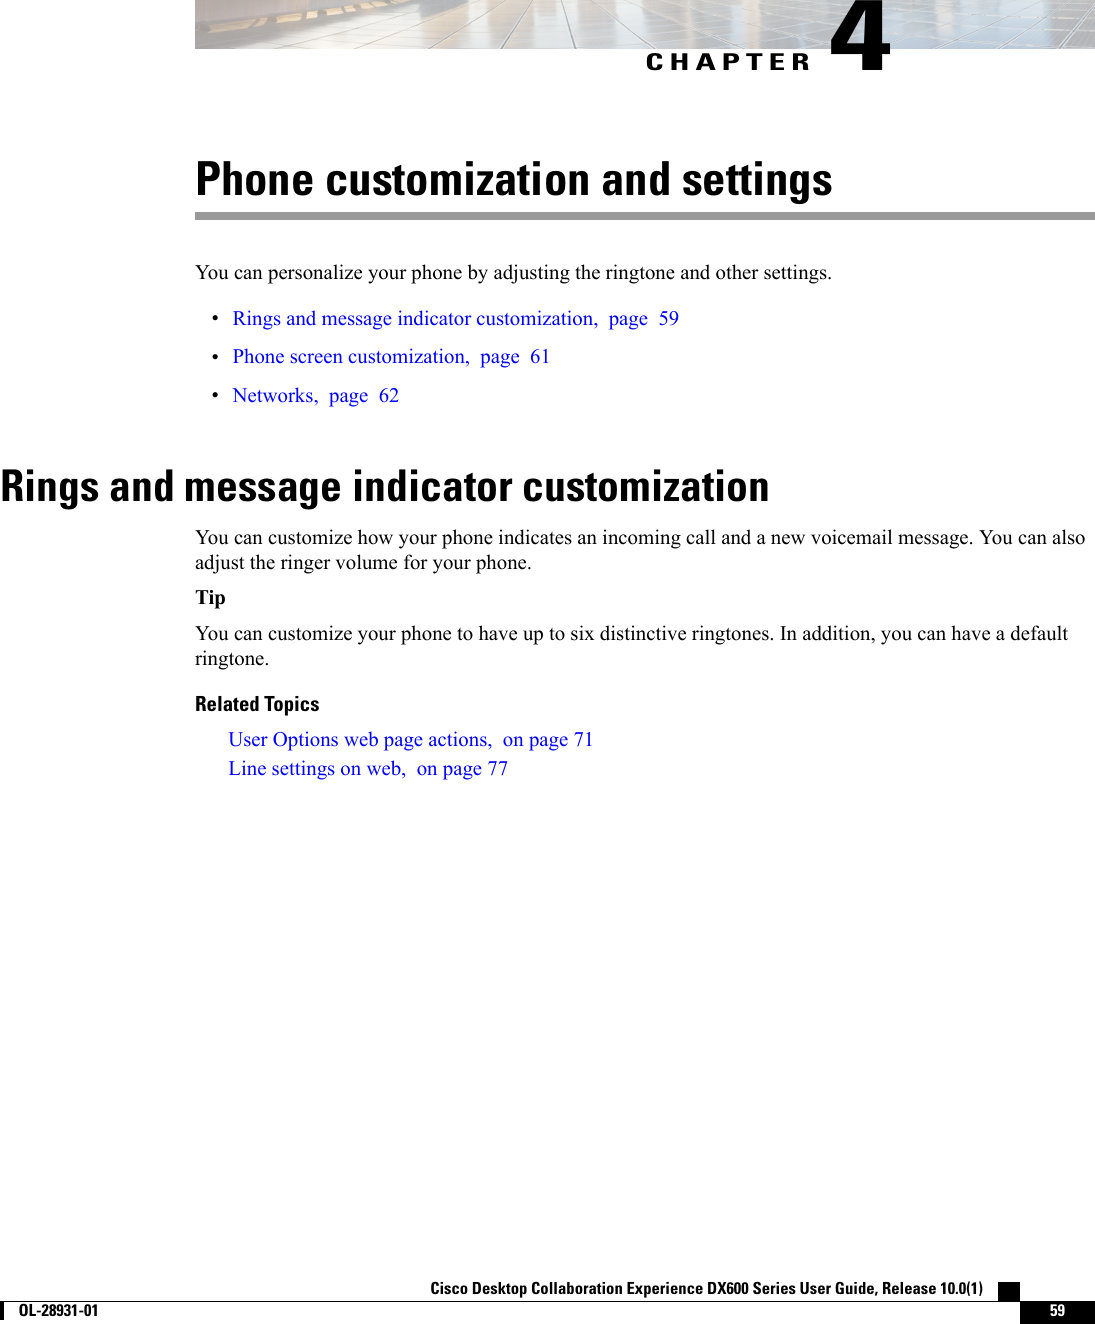 CHAPTER 4Phone customization and settingsYou can personalize your phone by adjusting the ringtone and other settings.•Rings and message indicator customization, page 59•Phone screen customization, page 61•Networks, page 62Rings and message indicator customizationYou can customize how your phone indicates an incoming call and a new voicemail message. You can alsoadjust the ringer volume for your phone.TipYou can customize your phone to have up to six distinctive ringtones. In addition, you can have a defaultringtone.Related TopicsUser Options web page actions, on page 71Line settings on web, on page 77Cisco Desktop Collaboration Experience DX600 Series User Guide, Release 10.0(1)        OL-28931-01 59